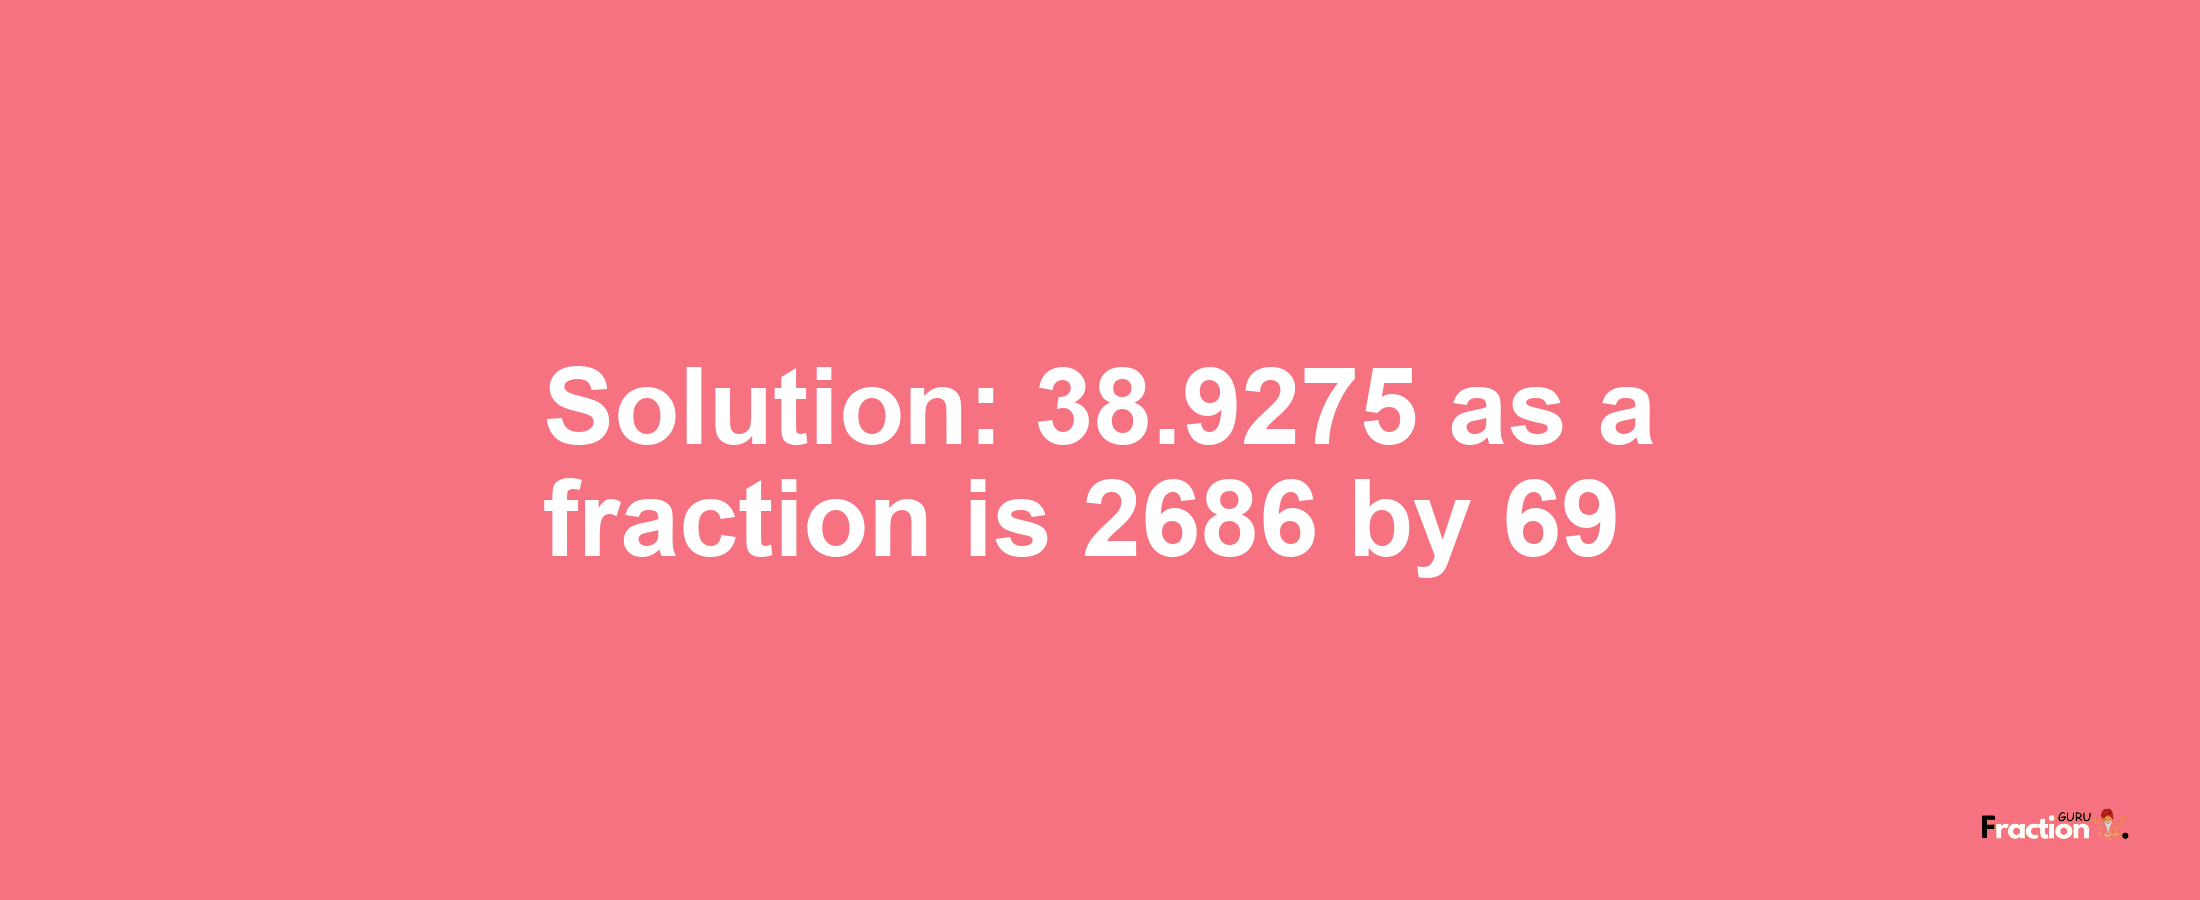 Solution:38.9275 as a fraction is 2686/69